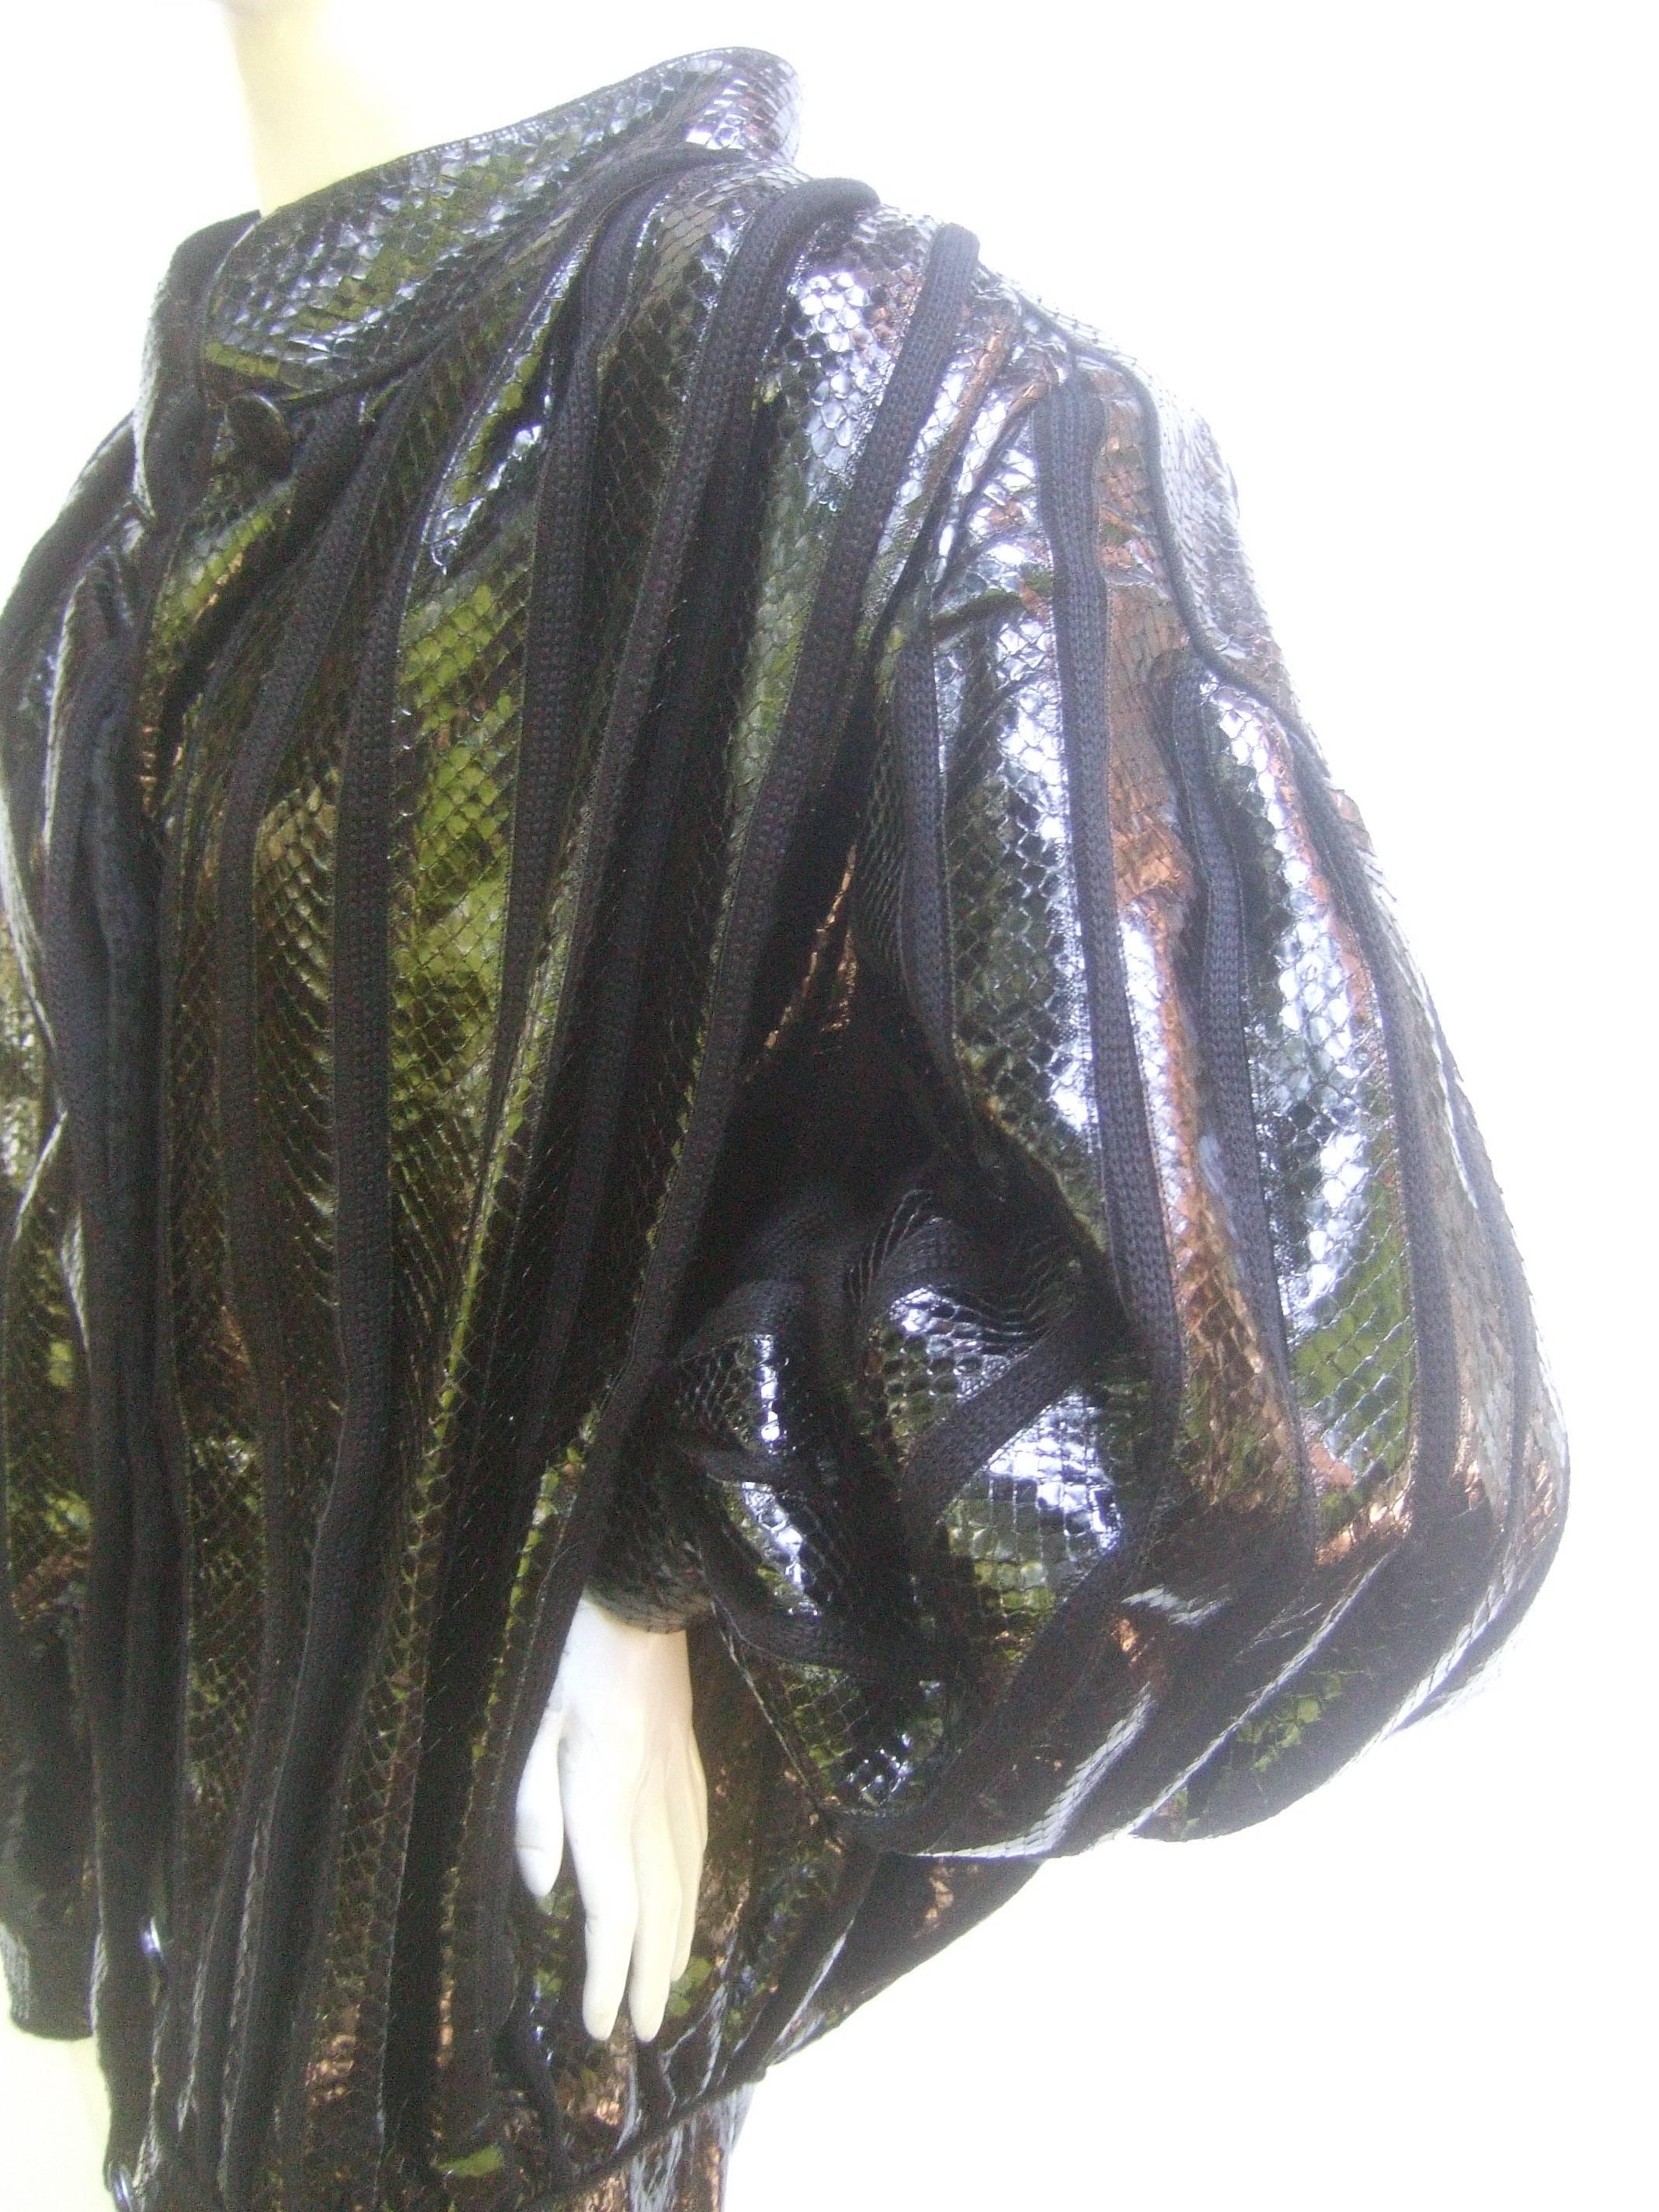 Exotic Avant Garde Italian Snakeskin Jacket from Neiman Marcus Size 44 In Good Condition For Sale In University City, MO